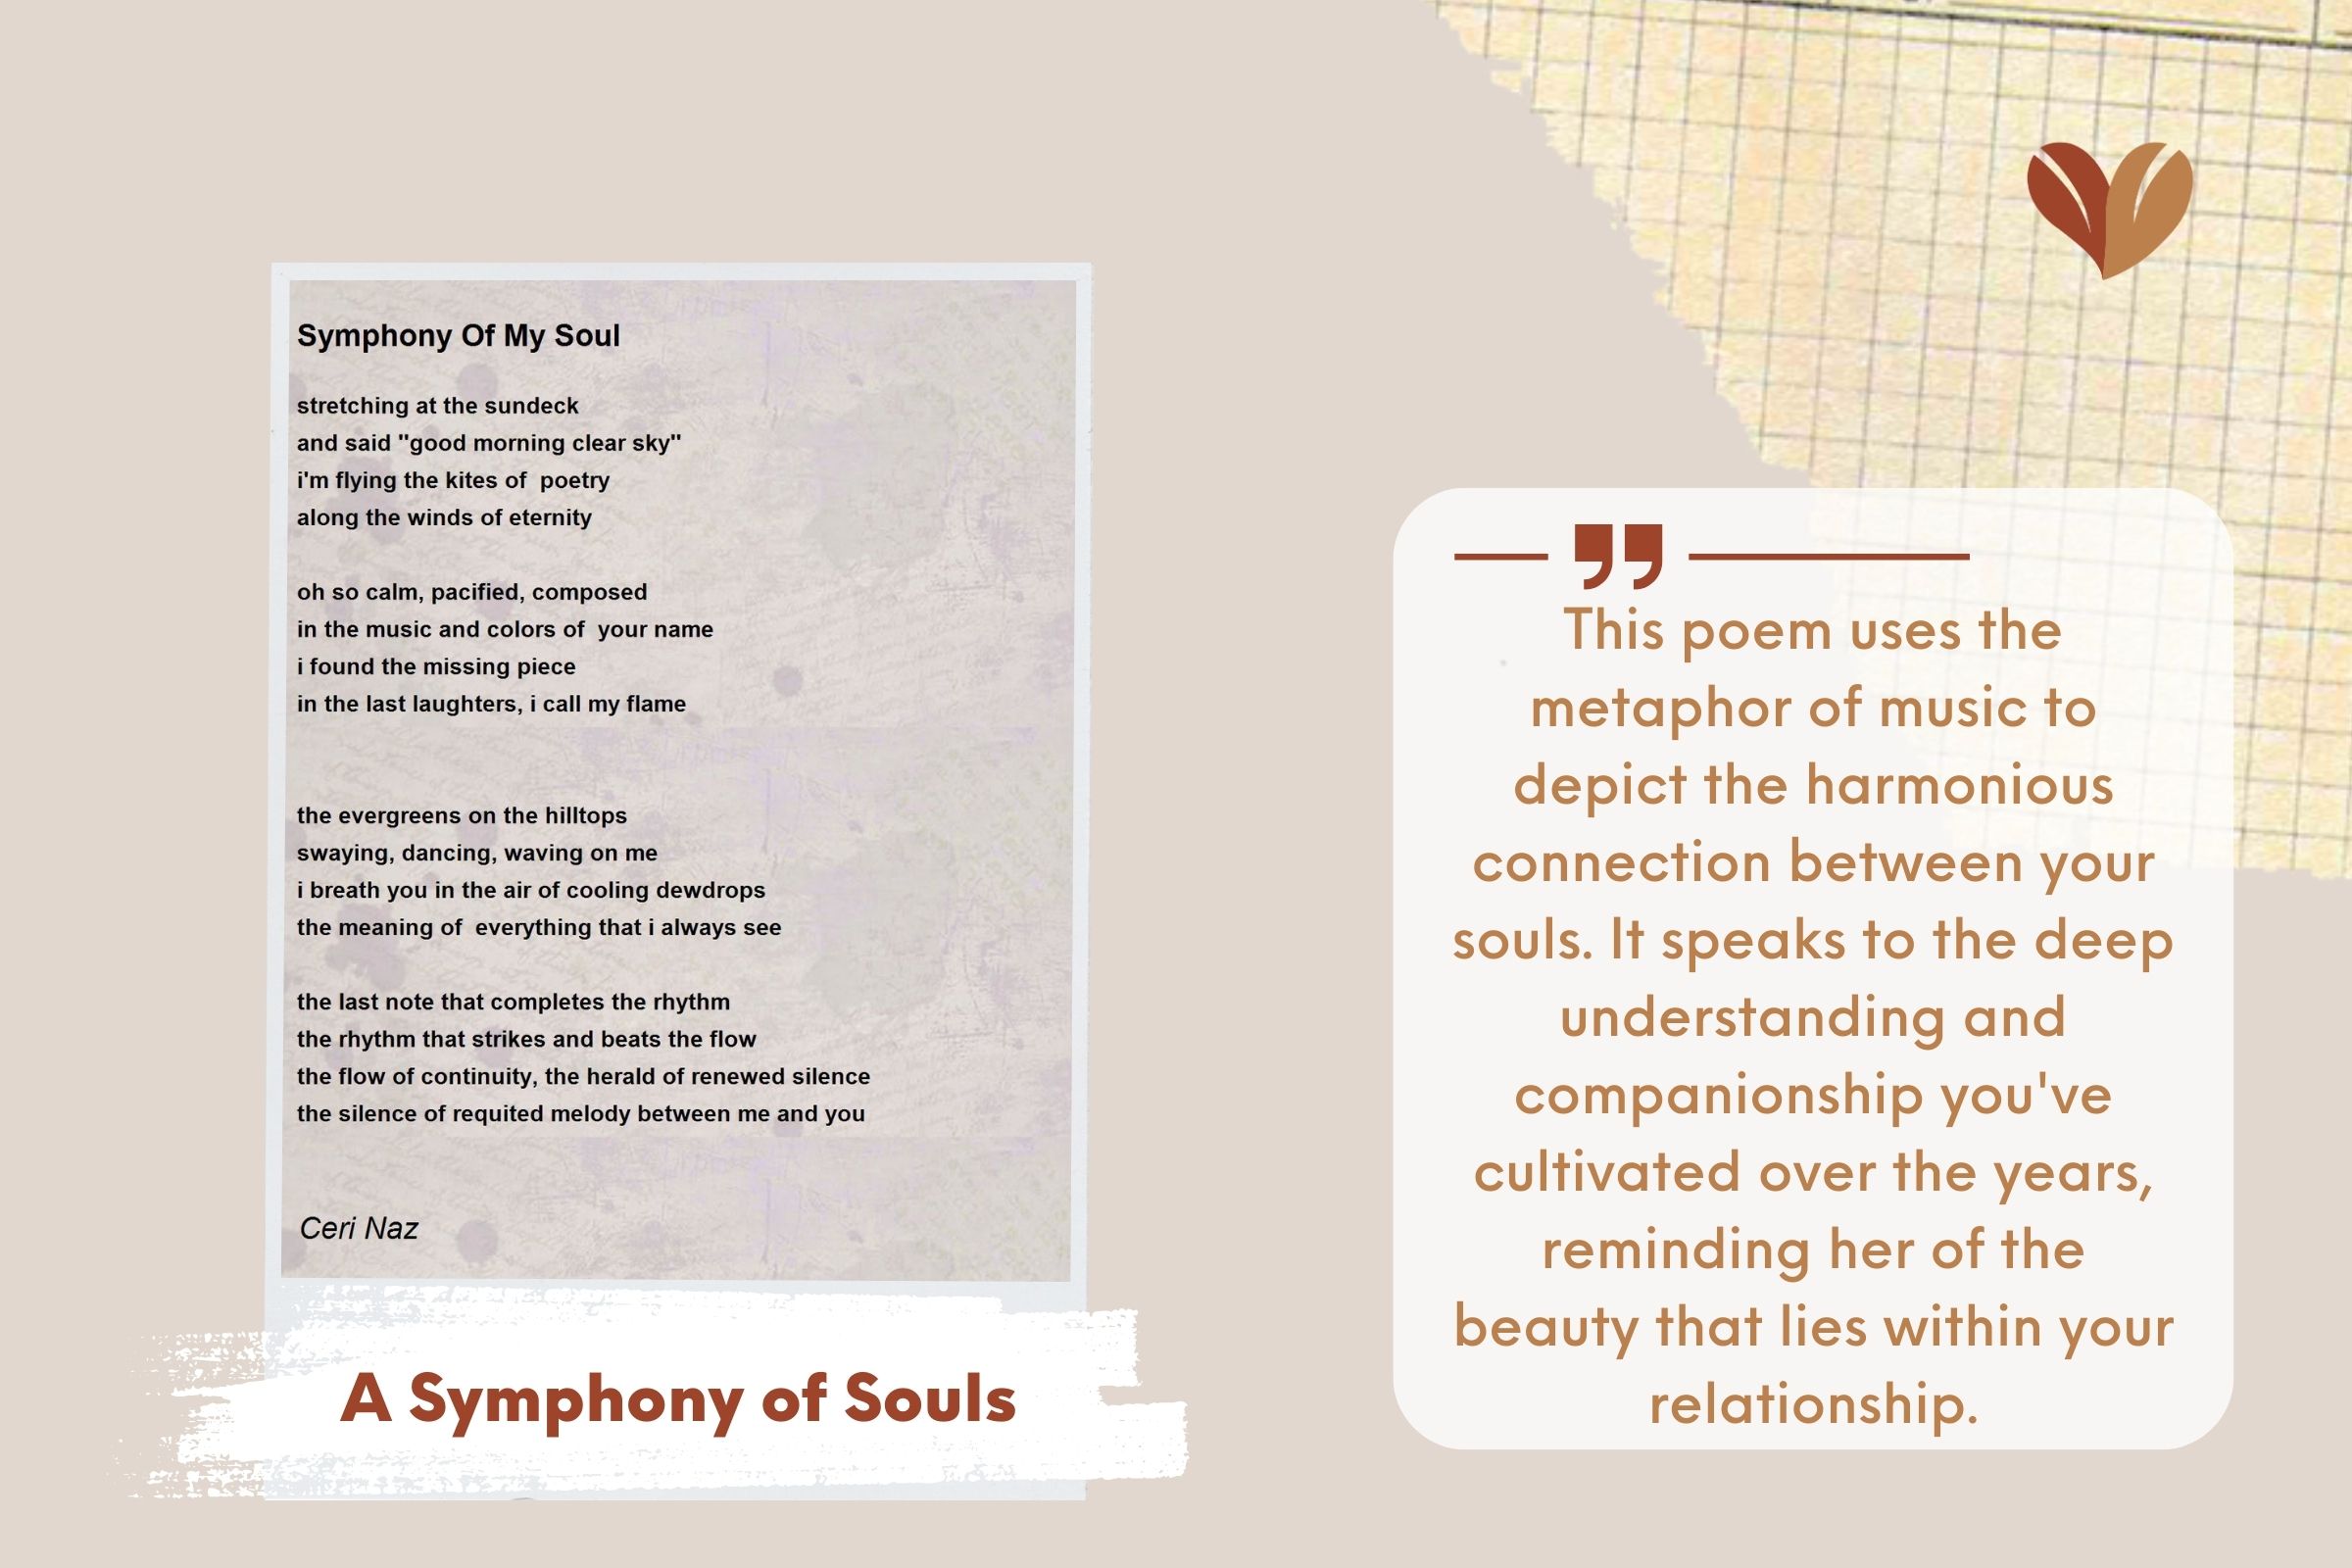 A Symphony of Souls is one of the anniversary gift ideas for her